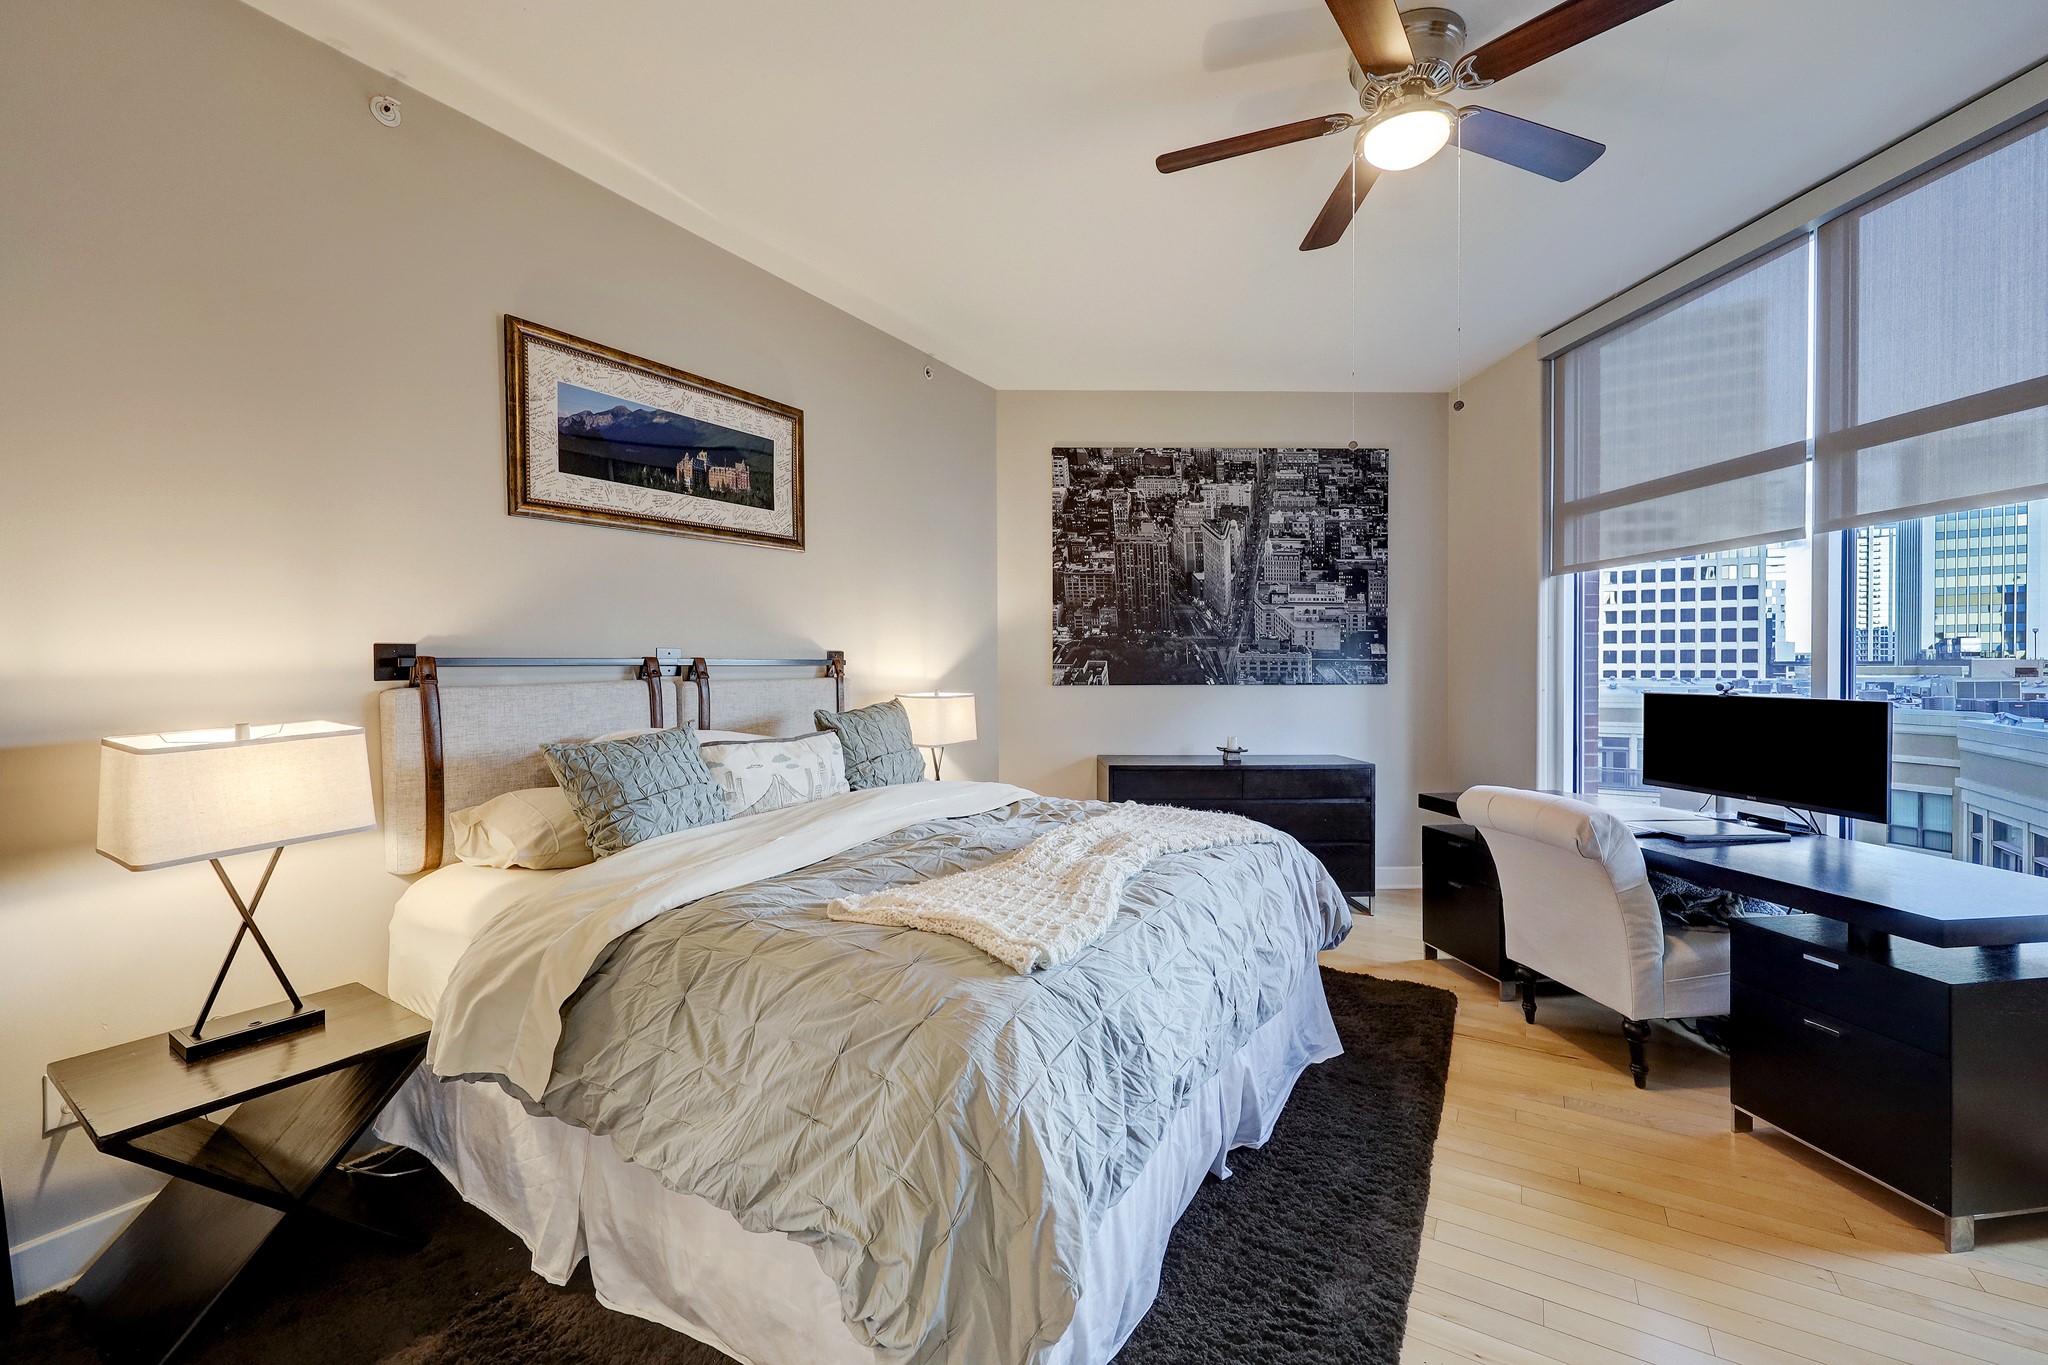 The second bedroom is spacious and features large windows and an ensuite bathroom. This bedroom is also larger enough for a workstation or sitting area.